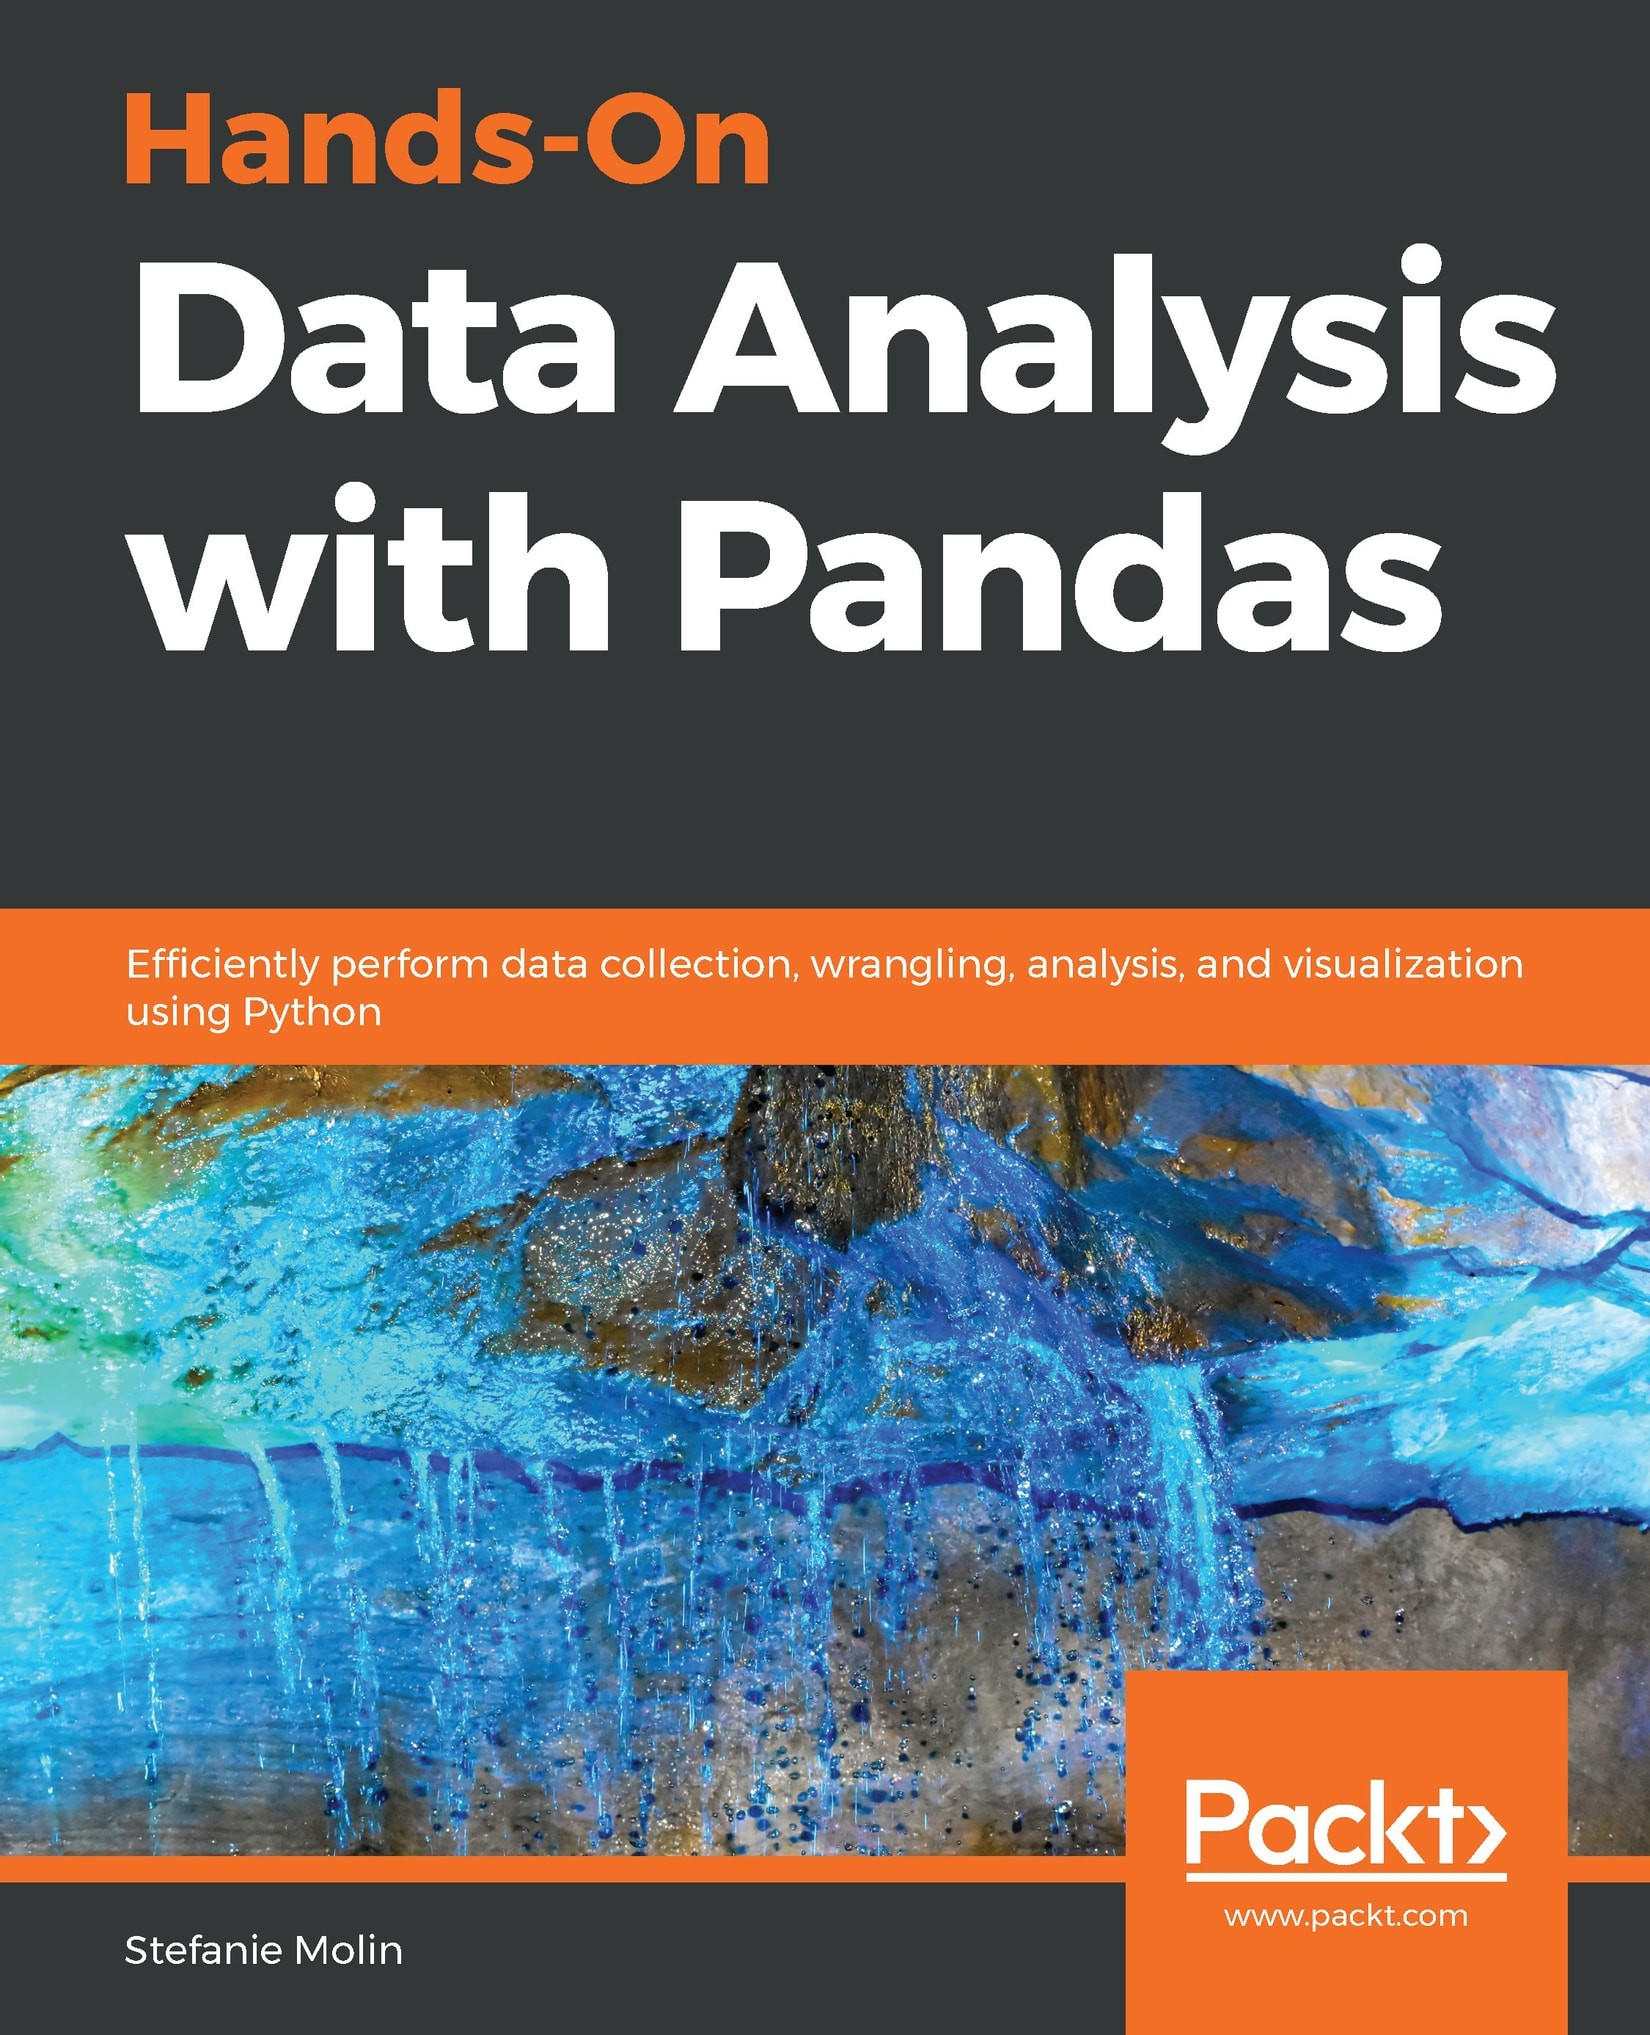 Hands-On Data Analysis with Pandas 2019